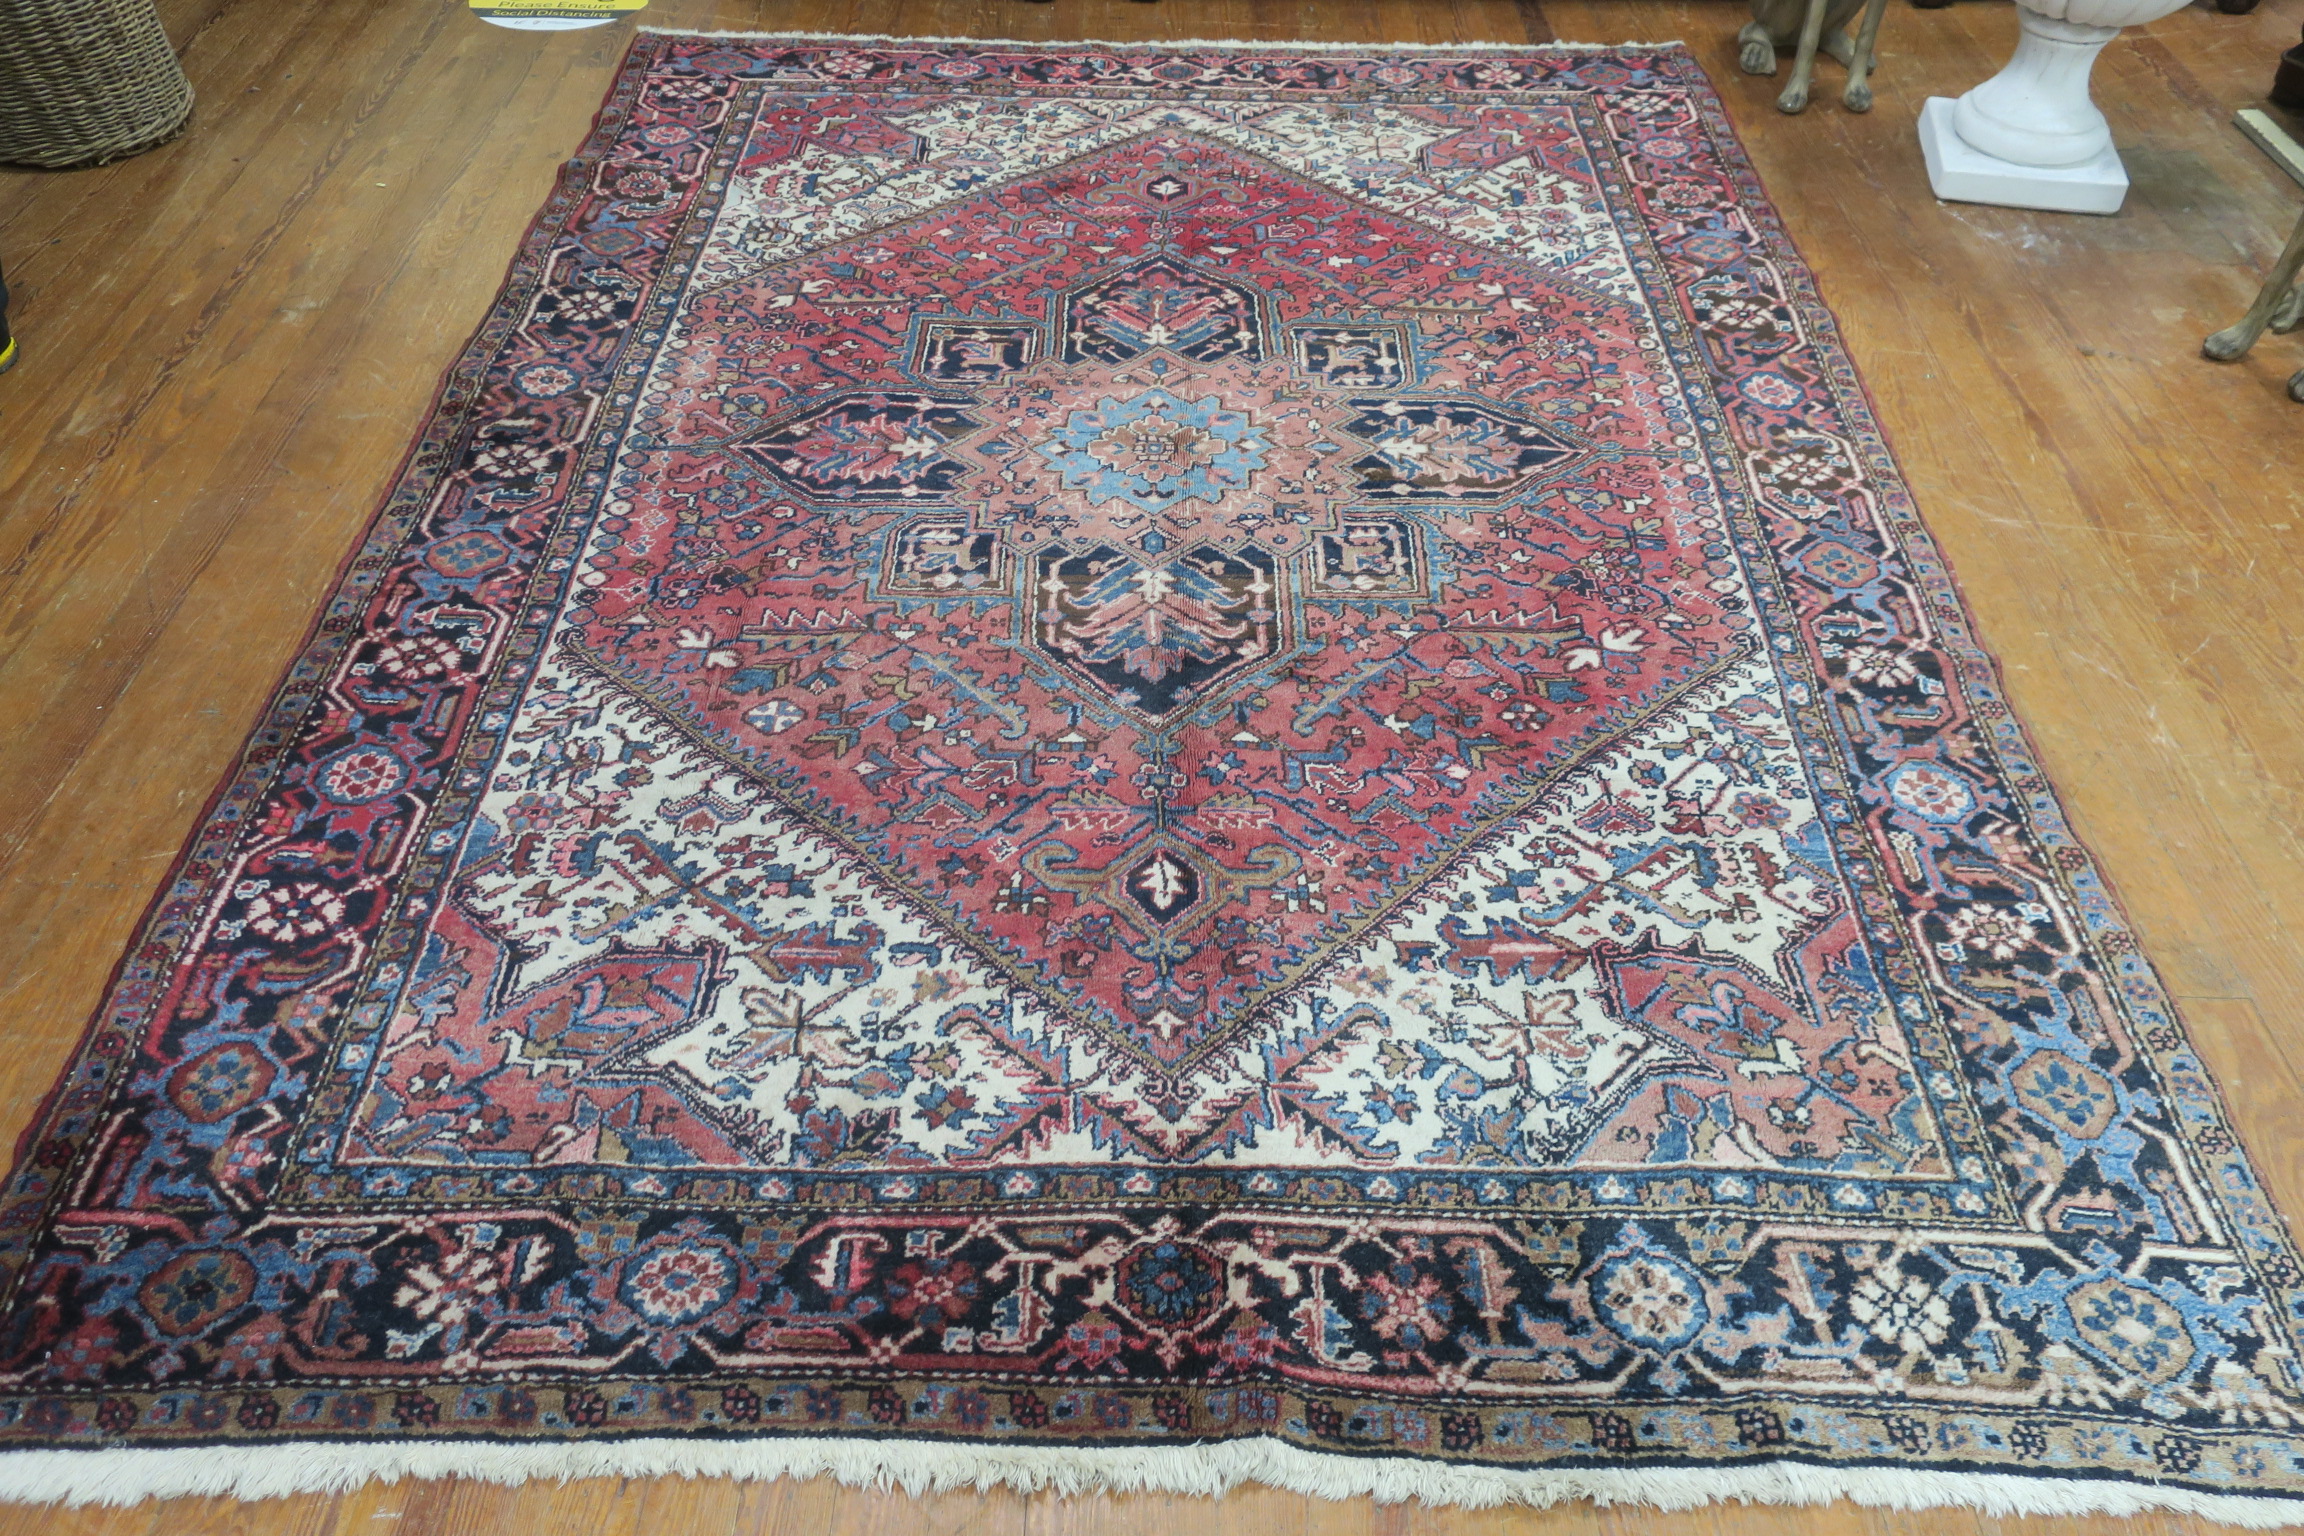 A HERIZ VINTAGE WOOL RUG the light pink beige and light blue ground with central panel filled with